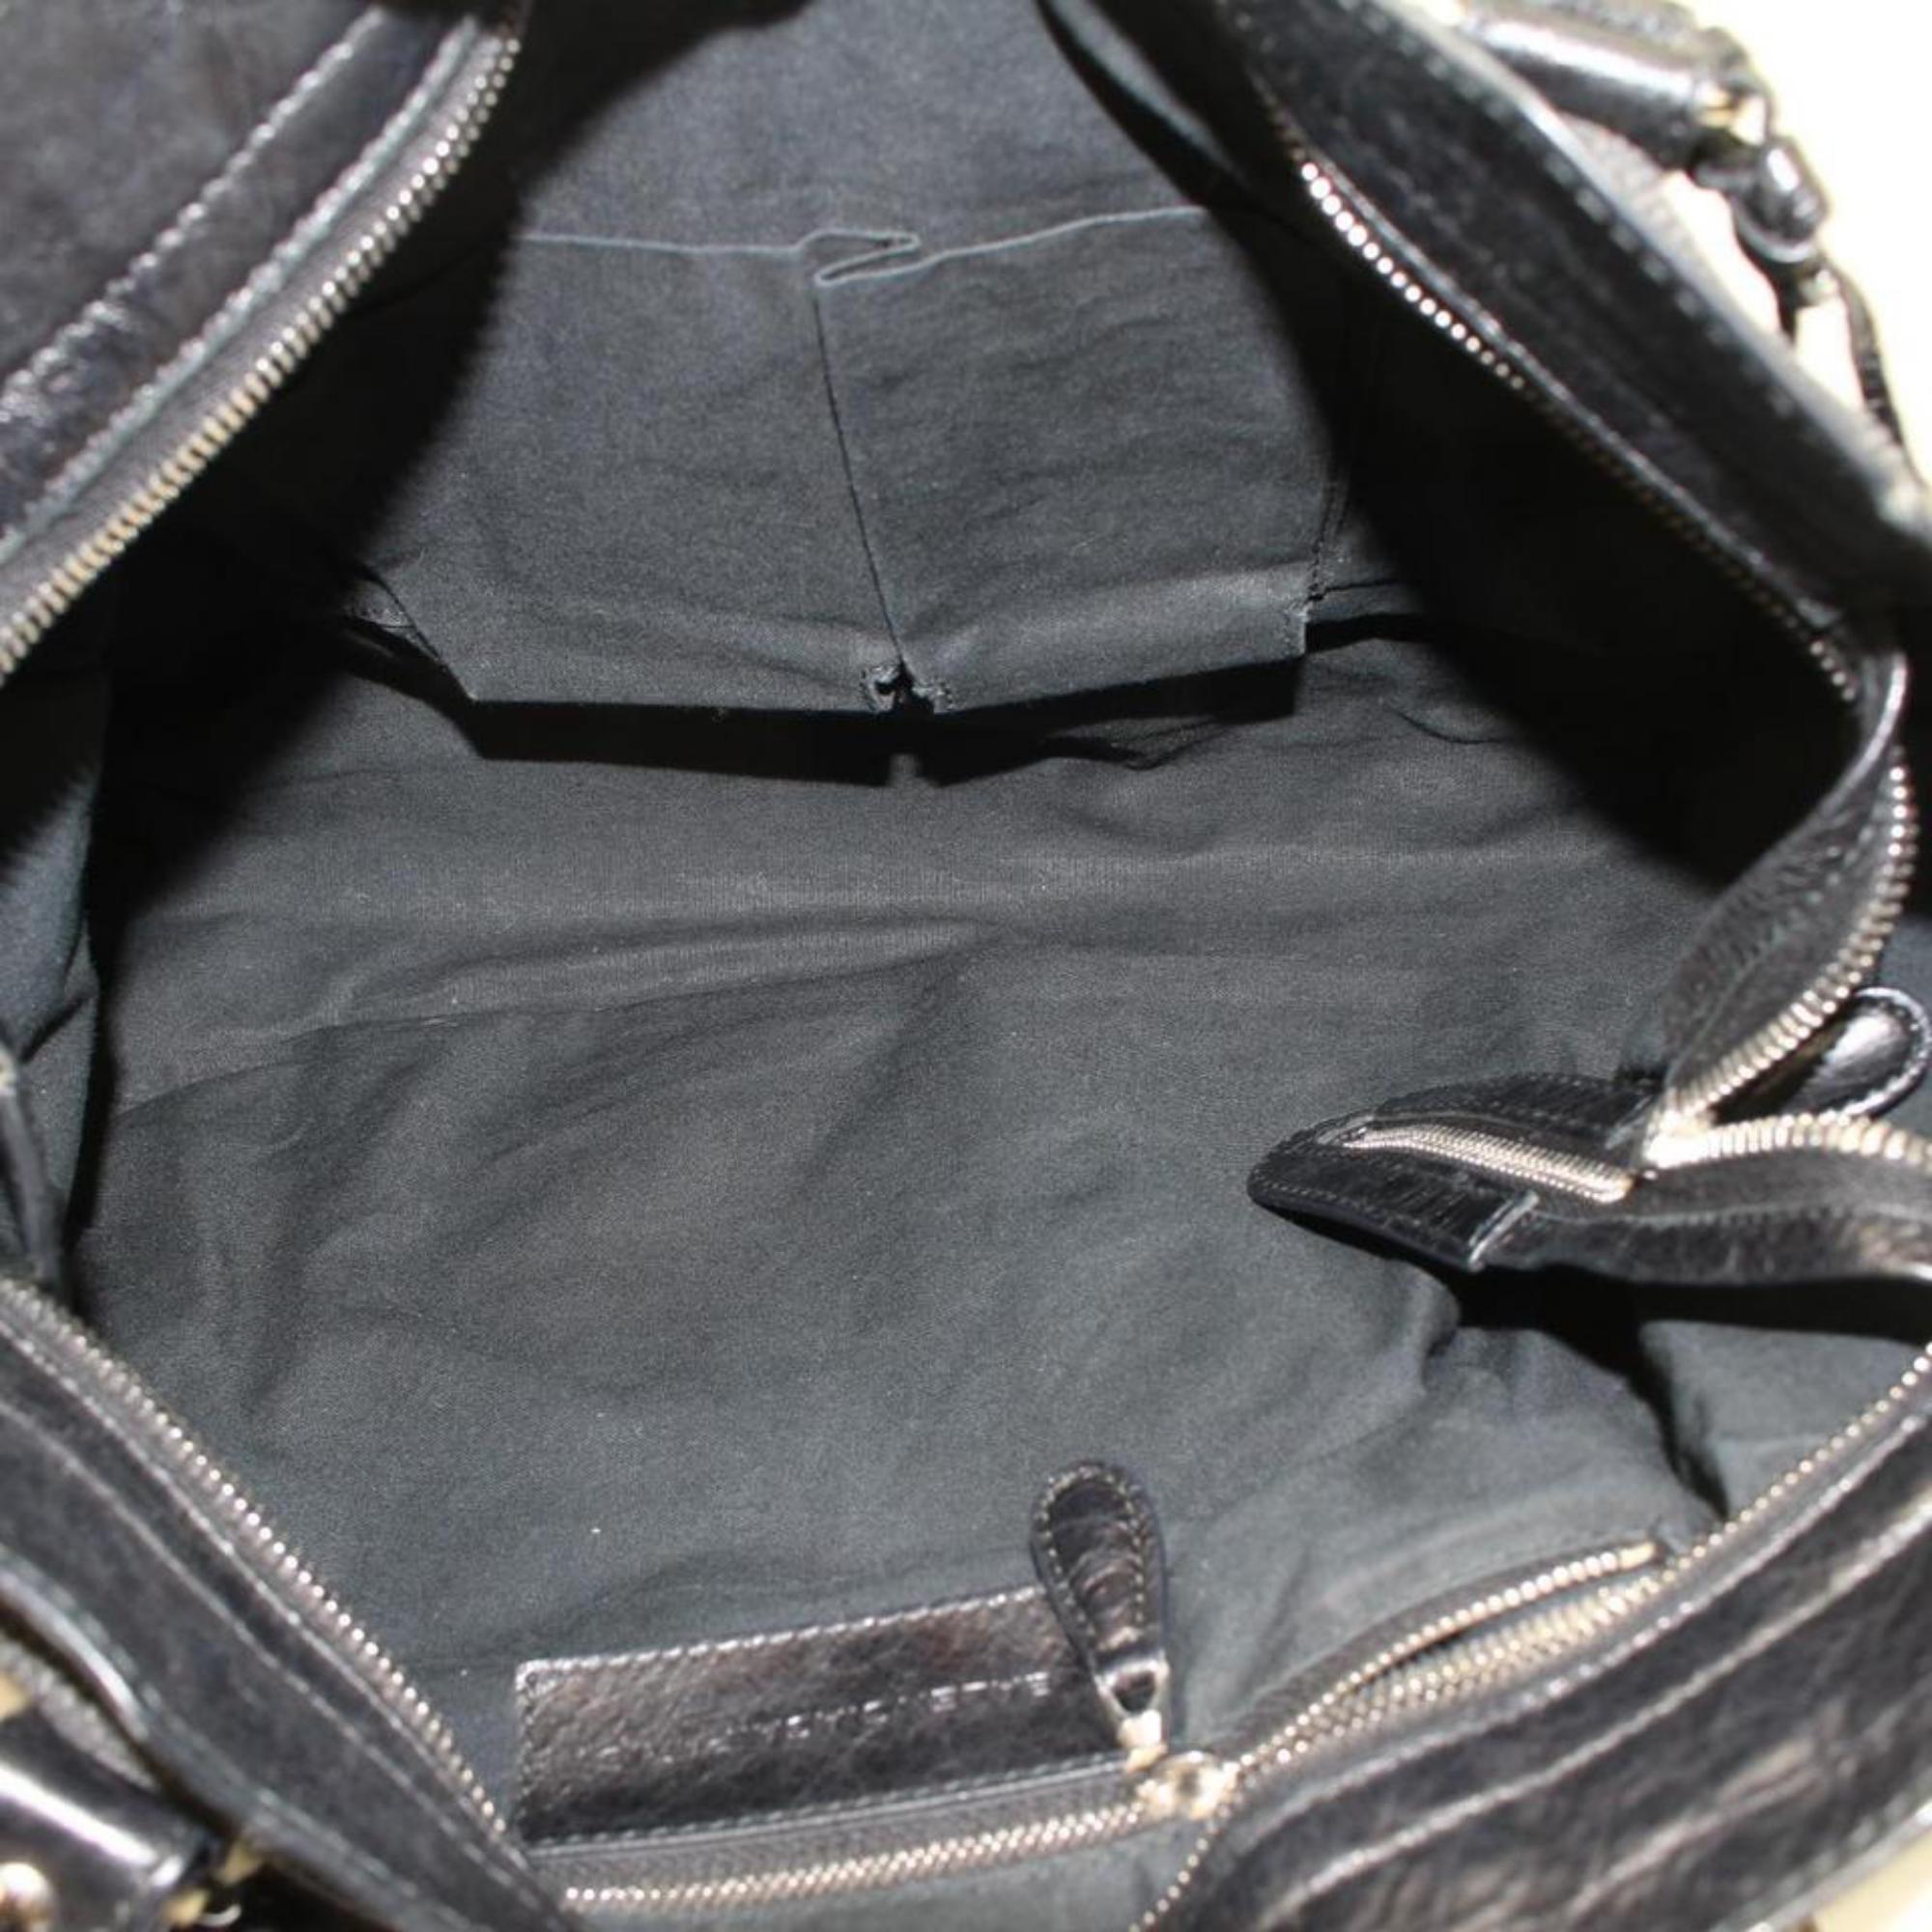 Balenciaga Denim The City 2way 865597 Black Canvas Shoulder Bag In Good Condition For Sale In Forest Hills, NY